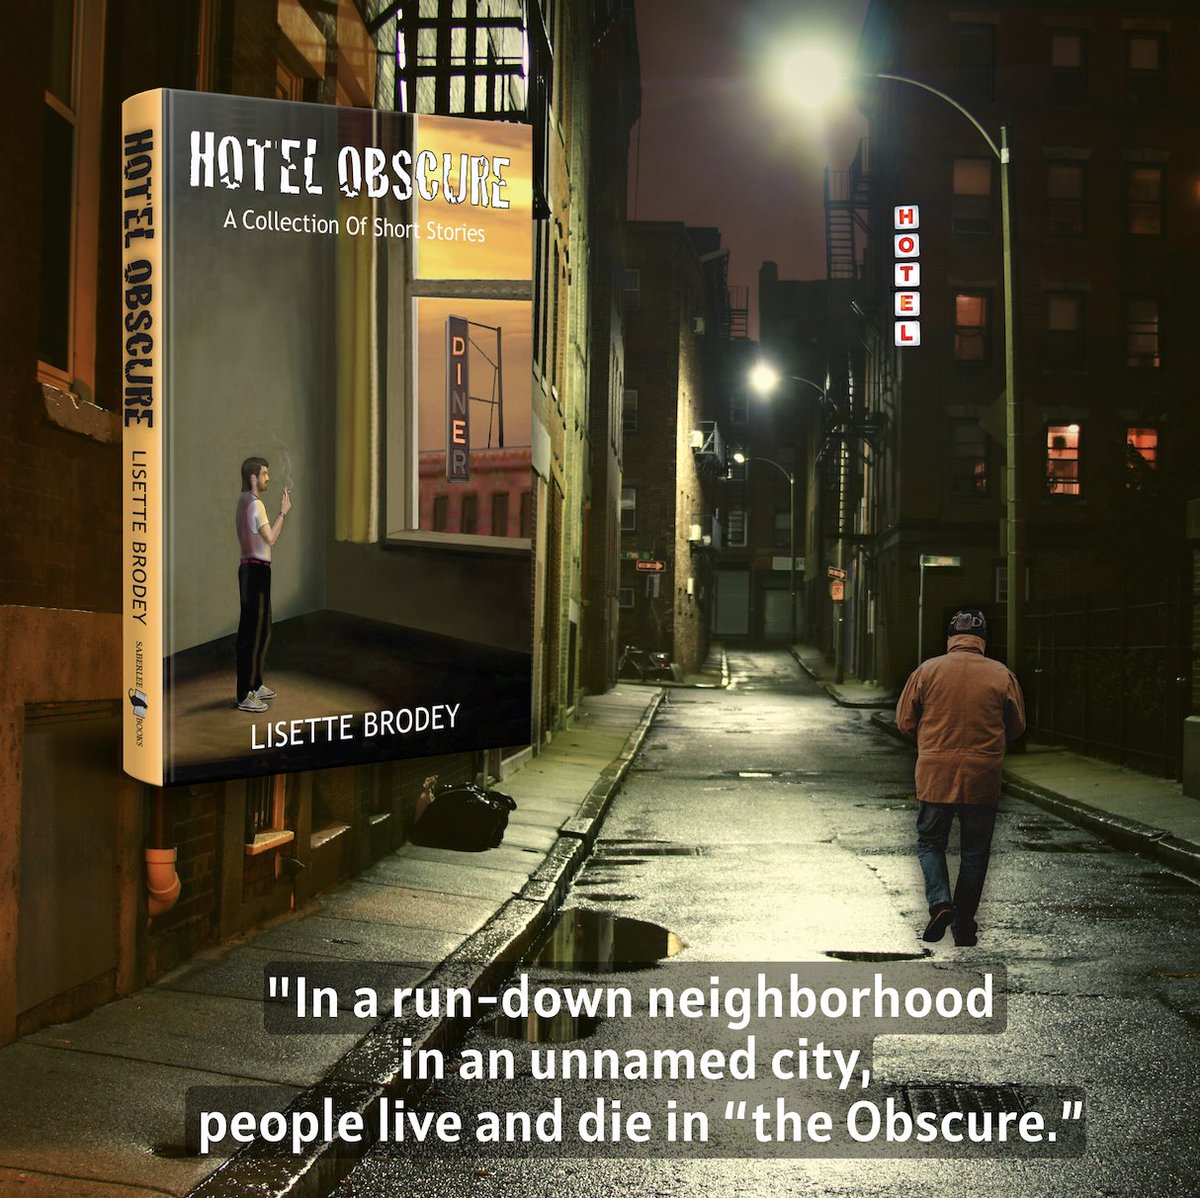 HOTEL OBSCURE 🌆

Sandy won't give up on being her new neighbor's best friend

Evan says an usual goodbye to a cruel aunt

Henry learns the identity of the two clowns who rent a room

mybook.to/HotelObscure 📙

#shortstories 🔶 #KU